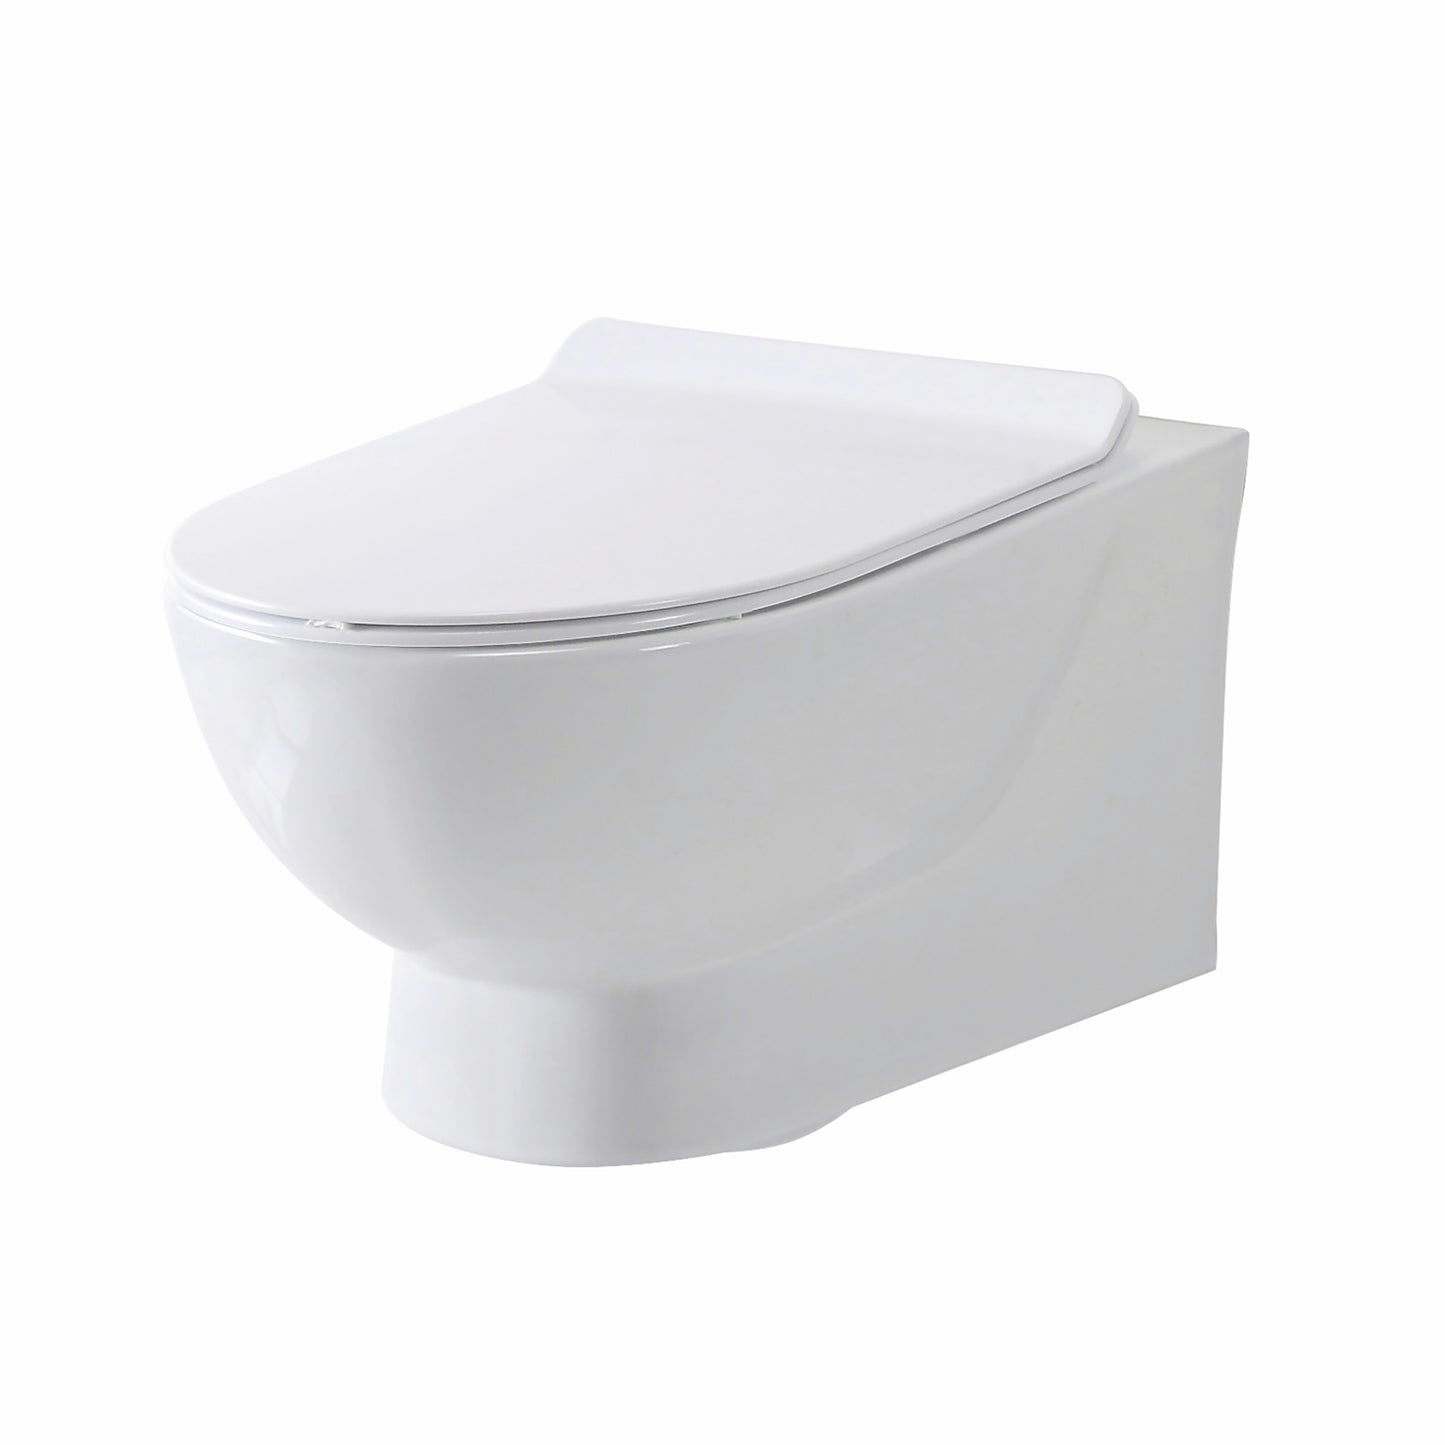 Belini Rimless Wall Hung Scudo WC Toilet with Soft Close Seat Option